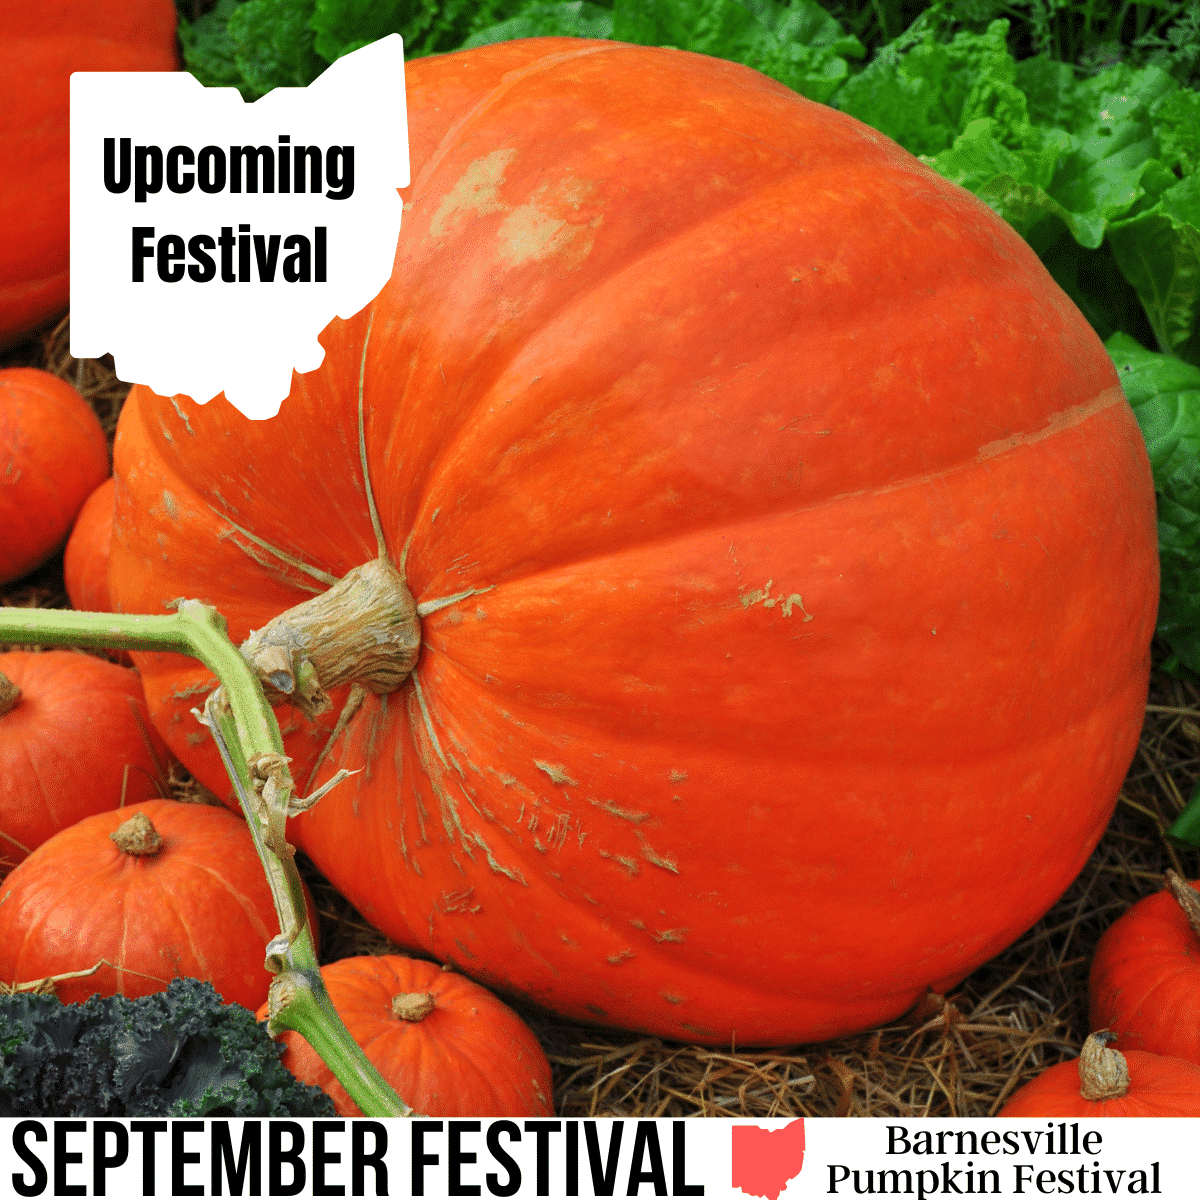 square image with a photo of a giant pumpkin with some smaller pumpkins in front of it. A white strip at the bottom has the text September Festival Barnesville Pumpkin Festival Image via Canva Pro License